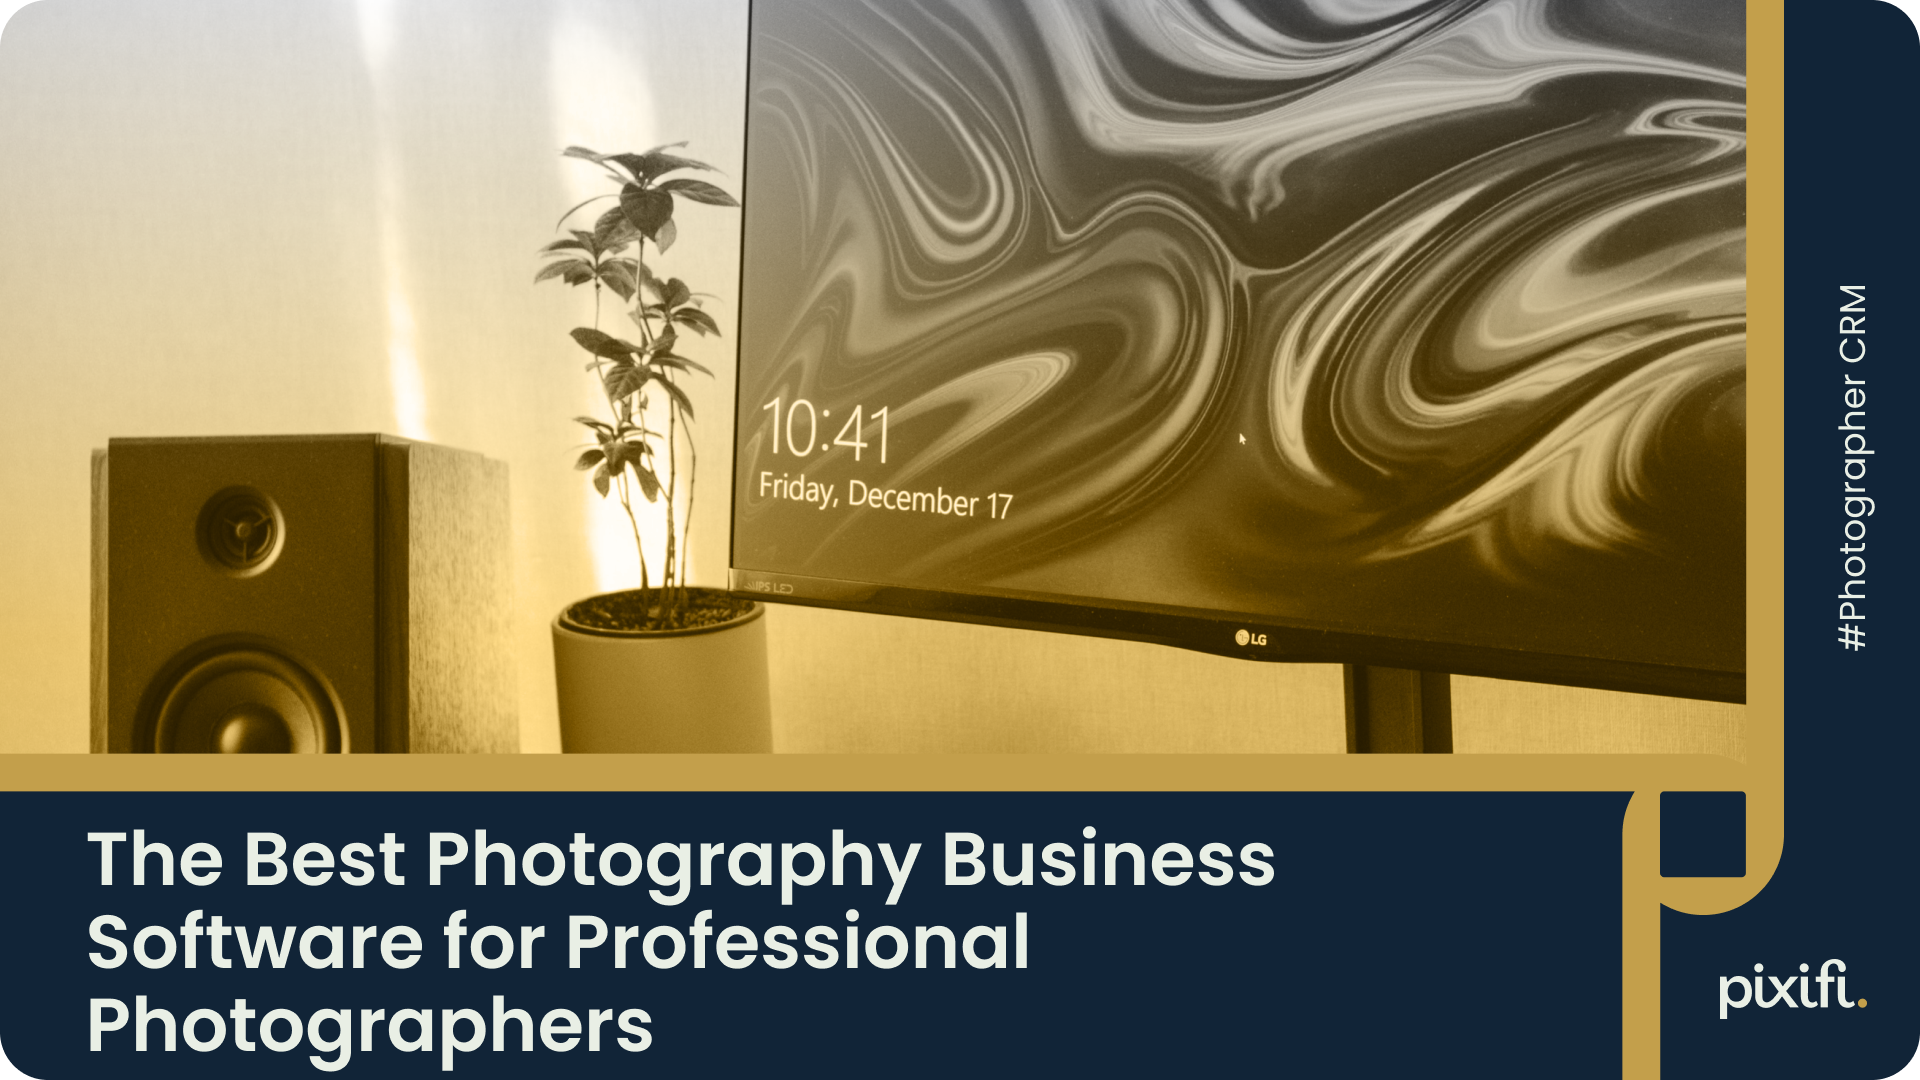 The Best Photography Business Software for Professional Photographers